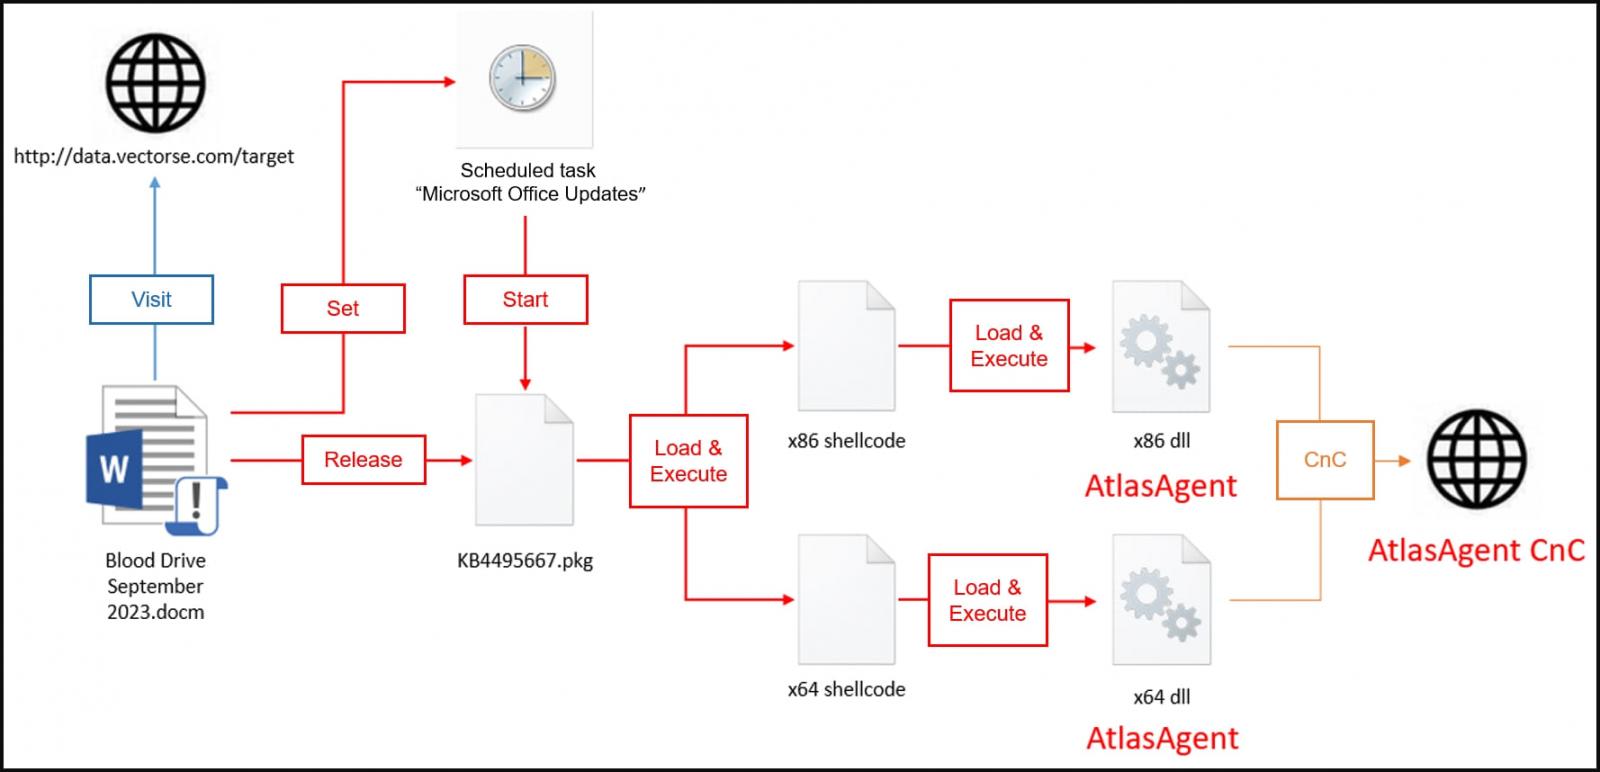 AtlasCross infection chain diagram